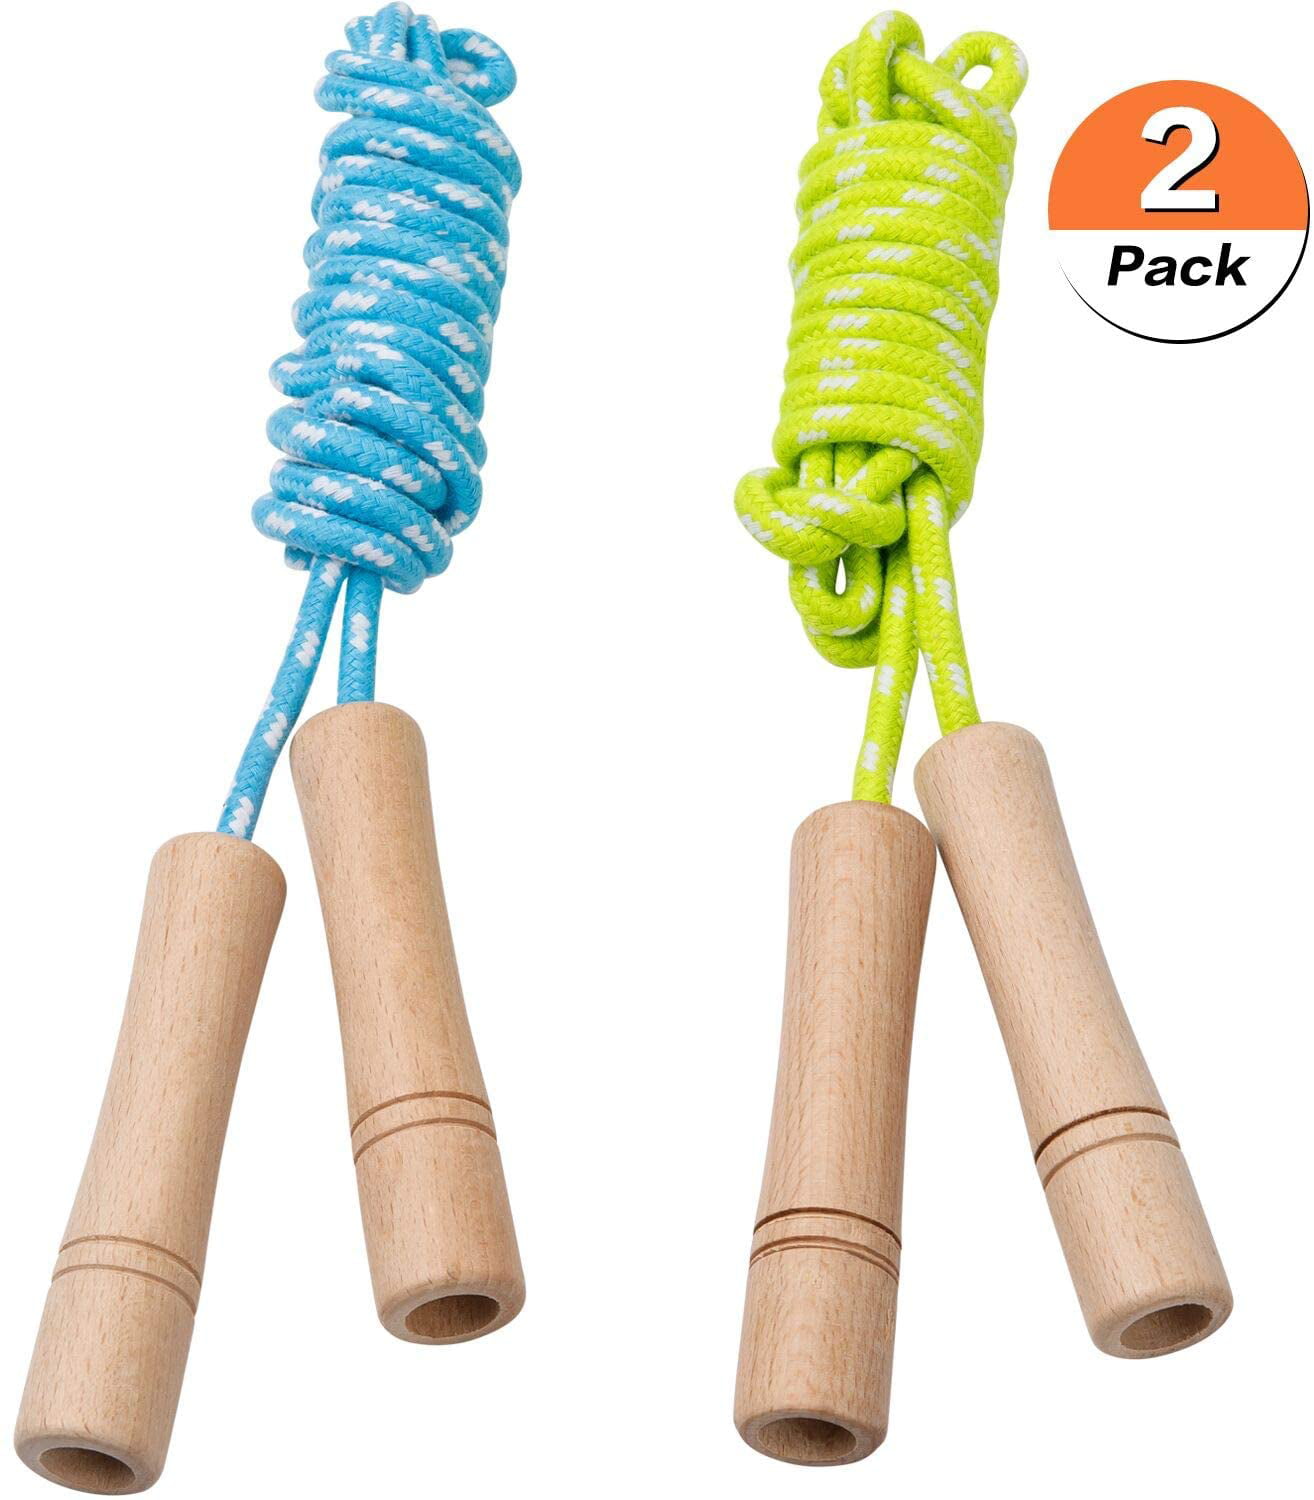 Recreation and fitness SACKORANGE Jump Rope with Wood Handles for Kids Color random Set of 4 Great for Outdoor Fun Activity,Party Favor 